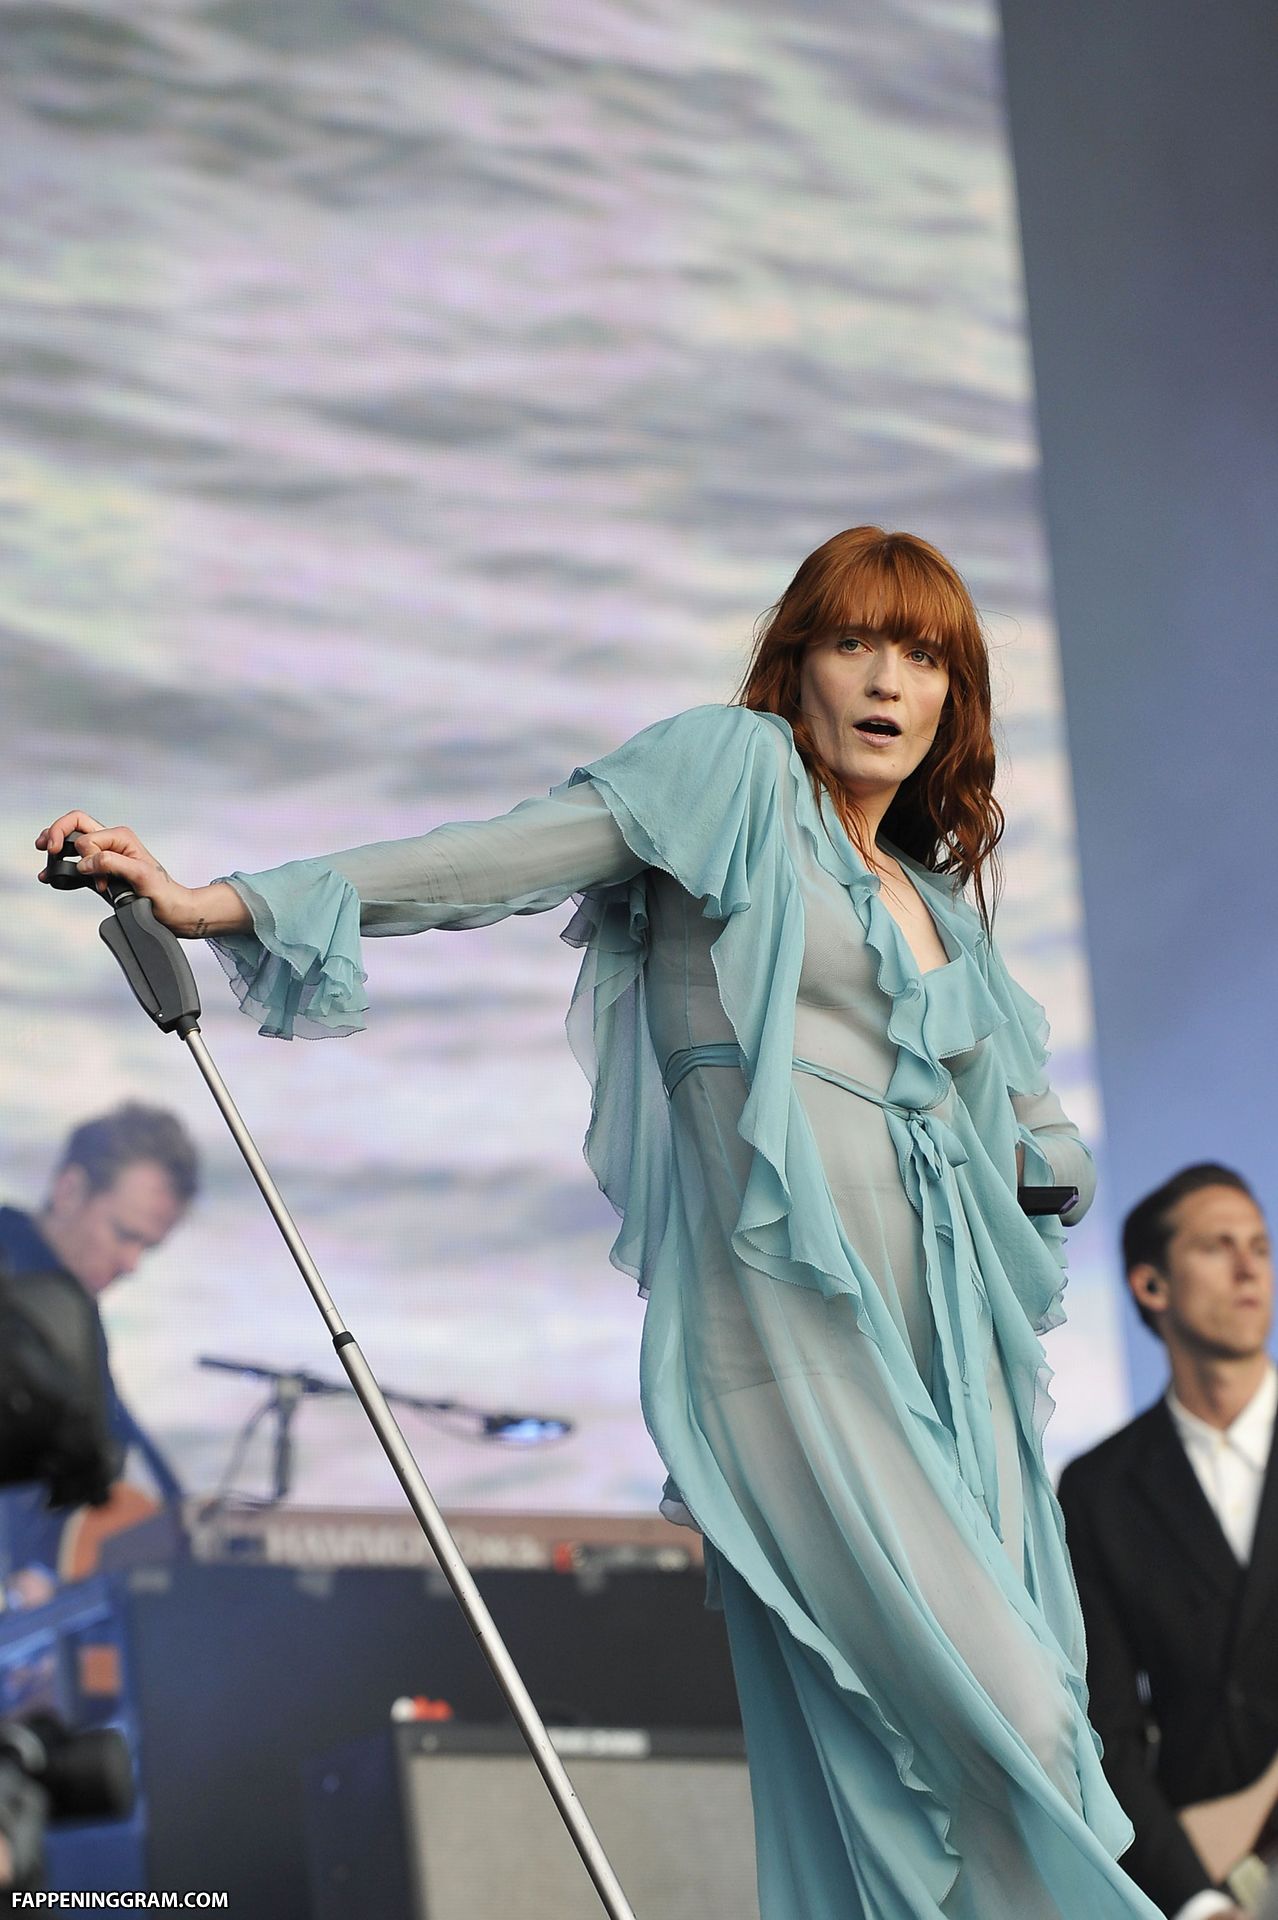 Nude florence welch Welch Pics